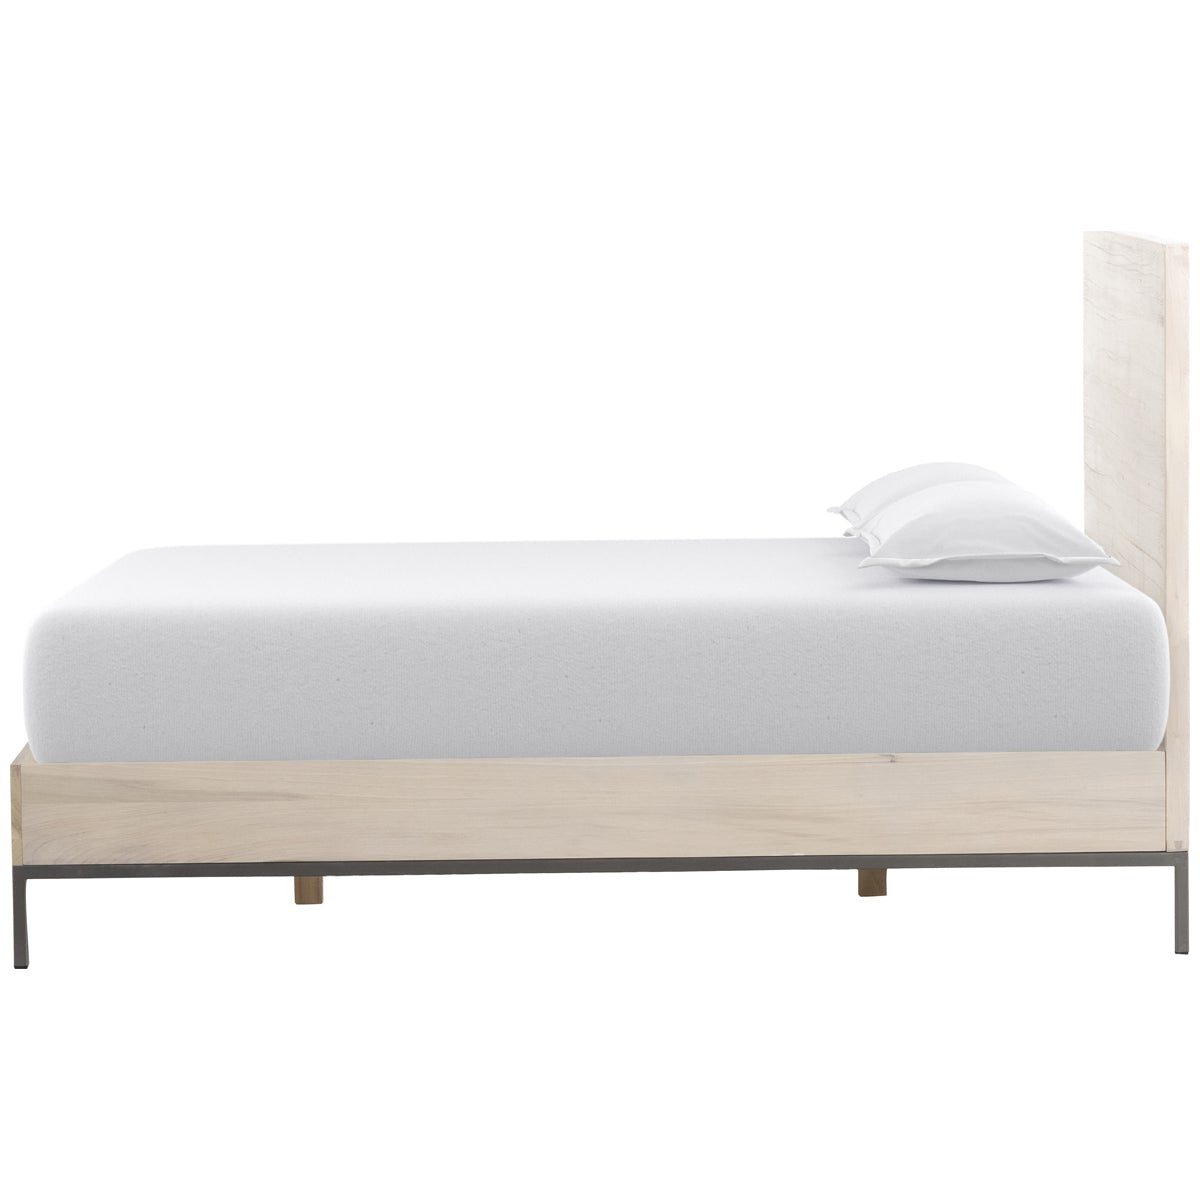 Four Hands Fulton Trey Bed